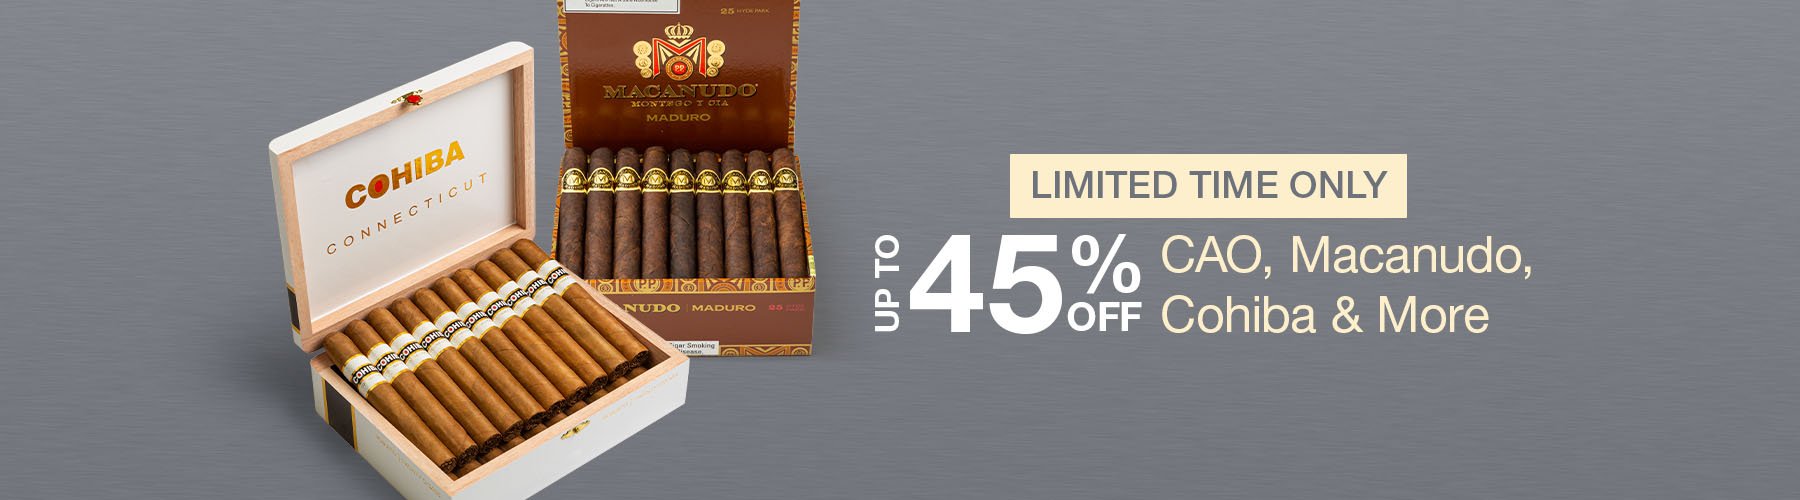 Up to 45% off CAO, Macanudo, Cohiba & More 
Limited Time Only!